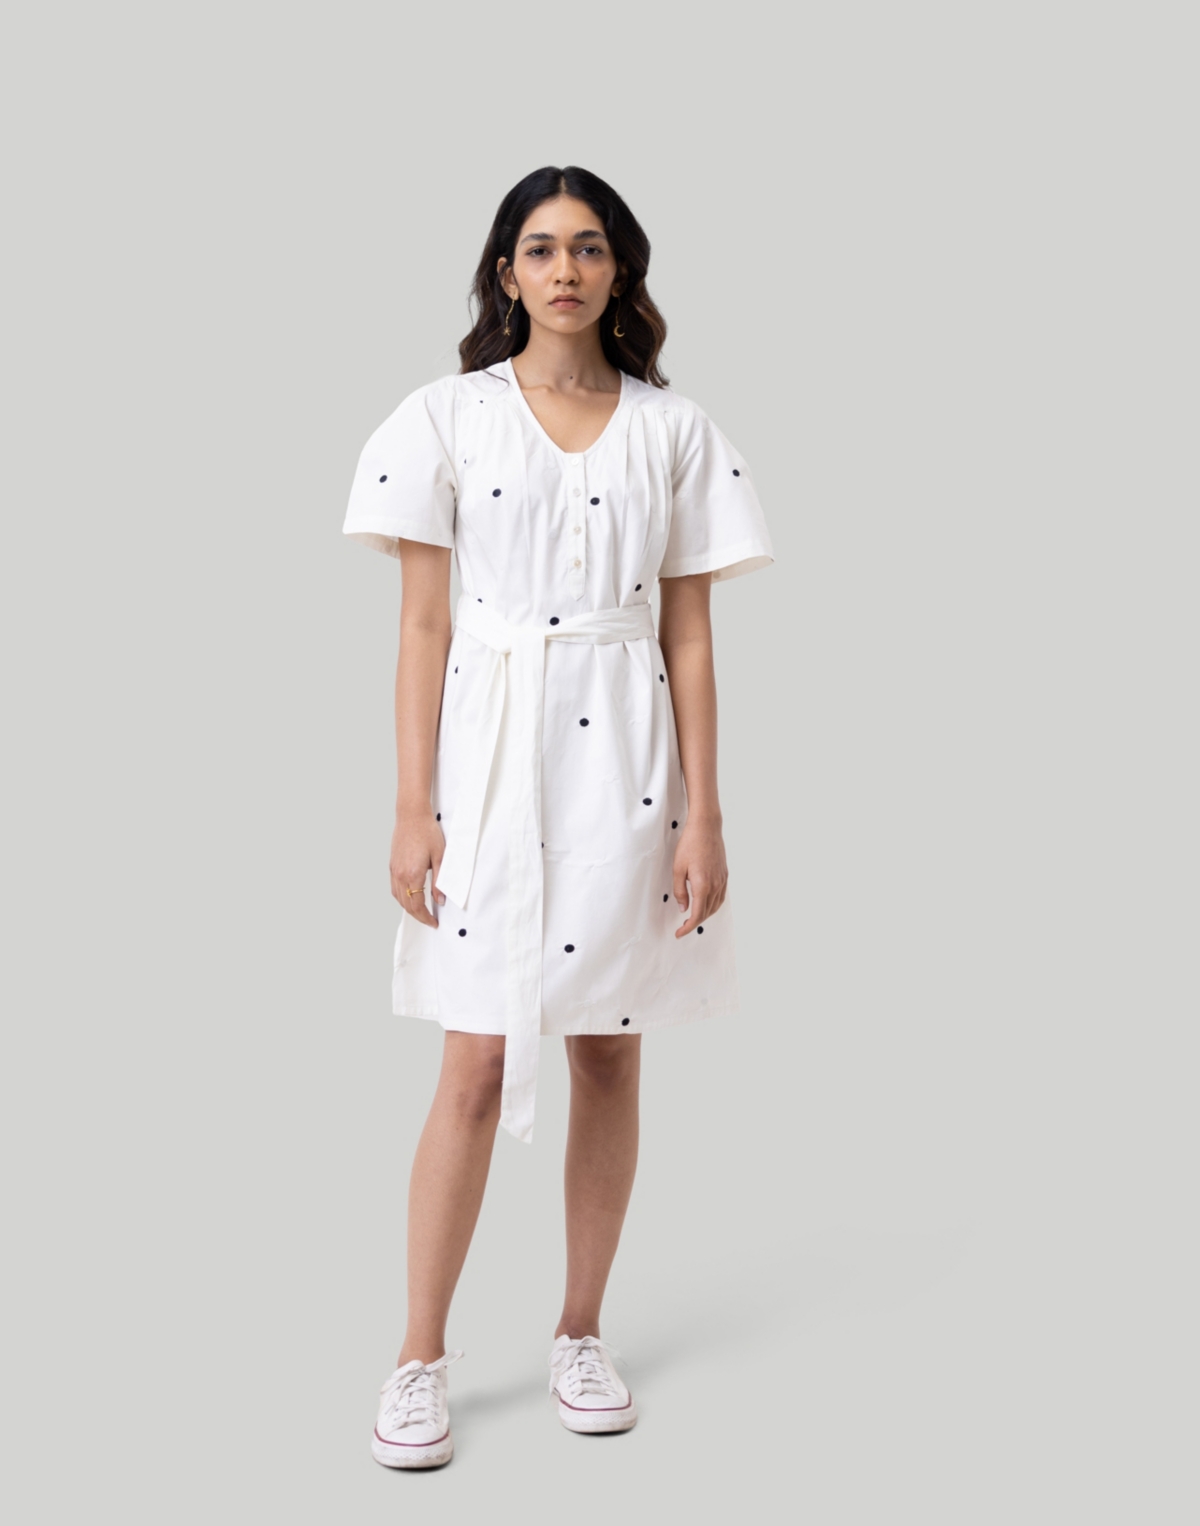 Women's Pleated Tent Dress - Shell off-white